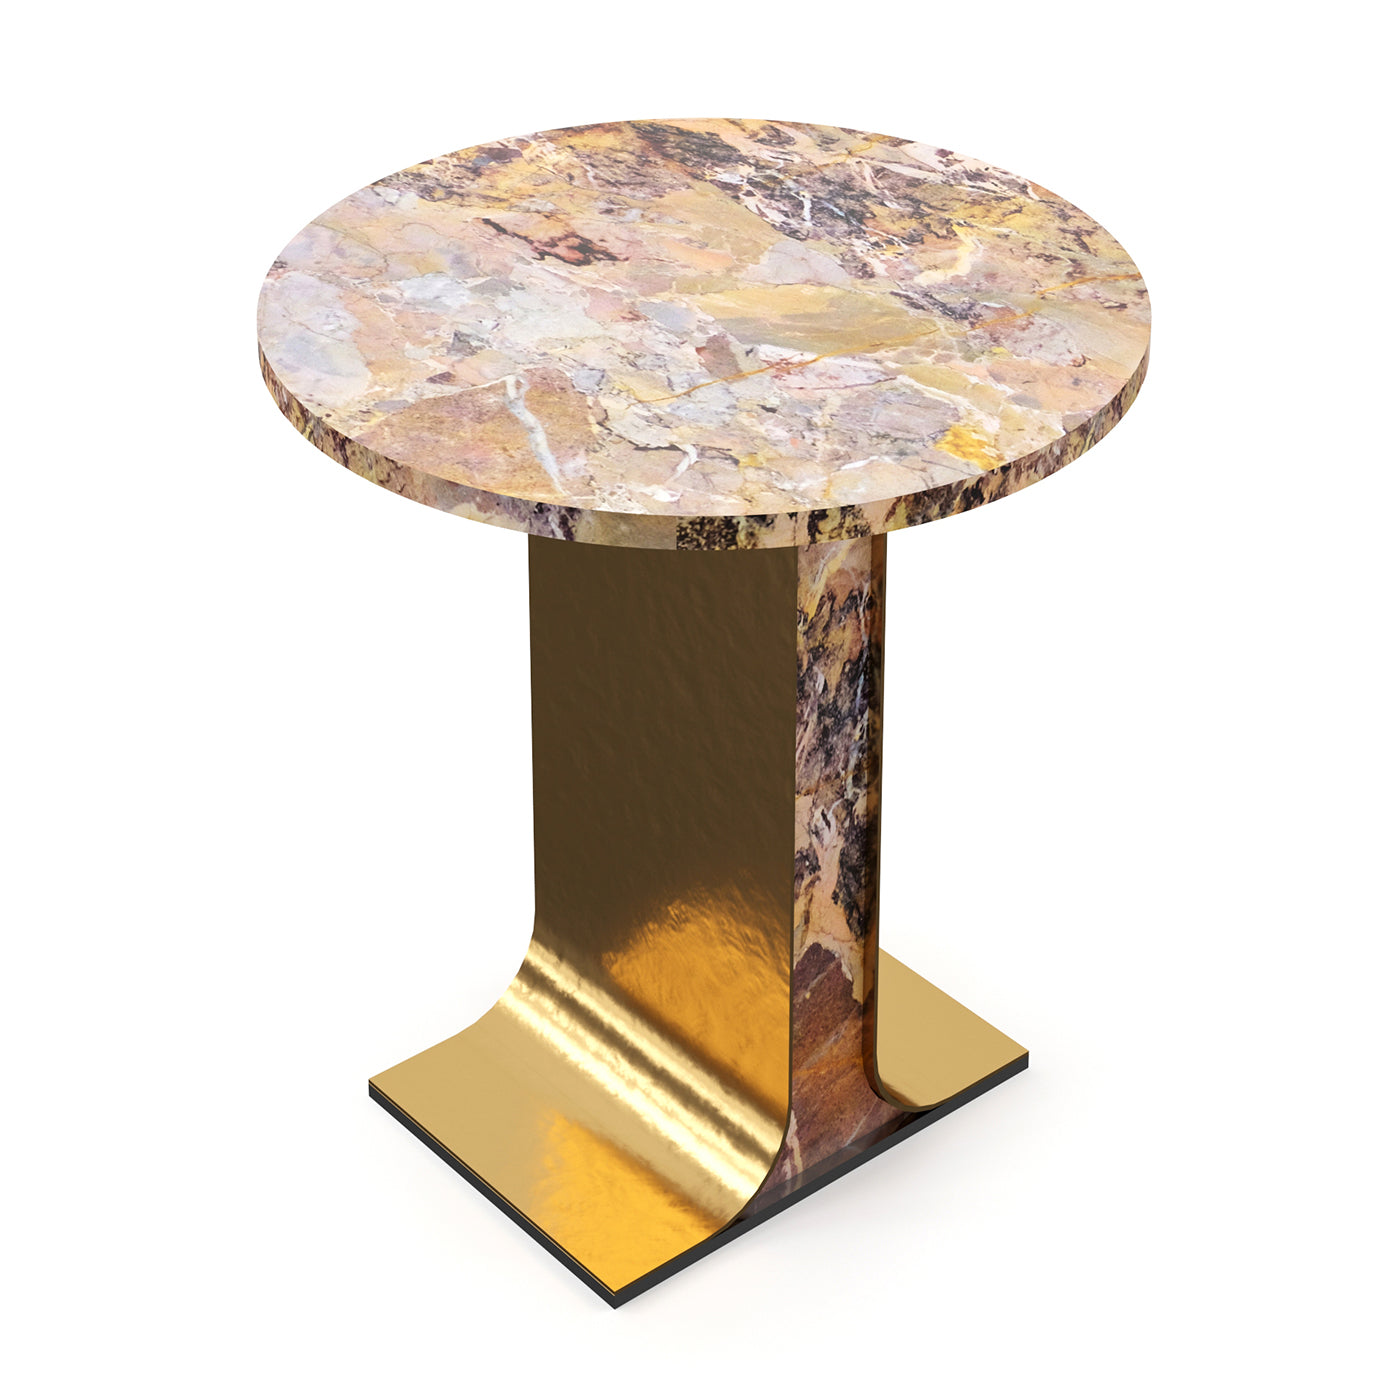 Hani Marble Side Table by Paolo Ciacci - Alternative view 1